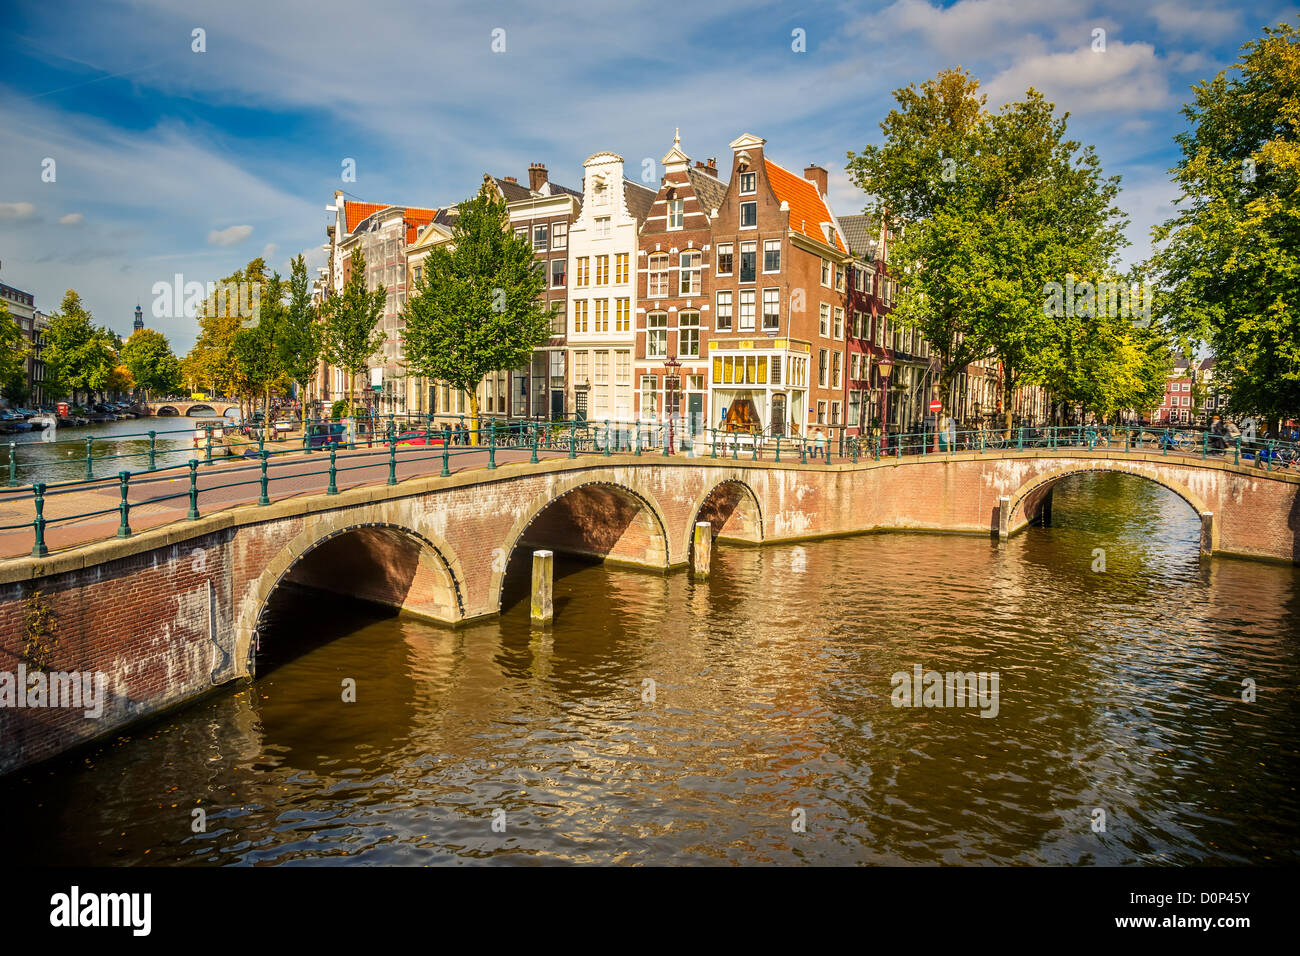 Bridges over canals in Amsterdam Stock Photo